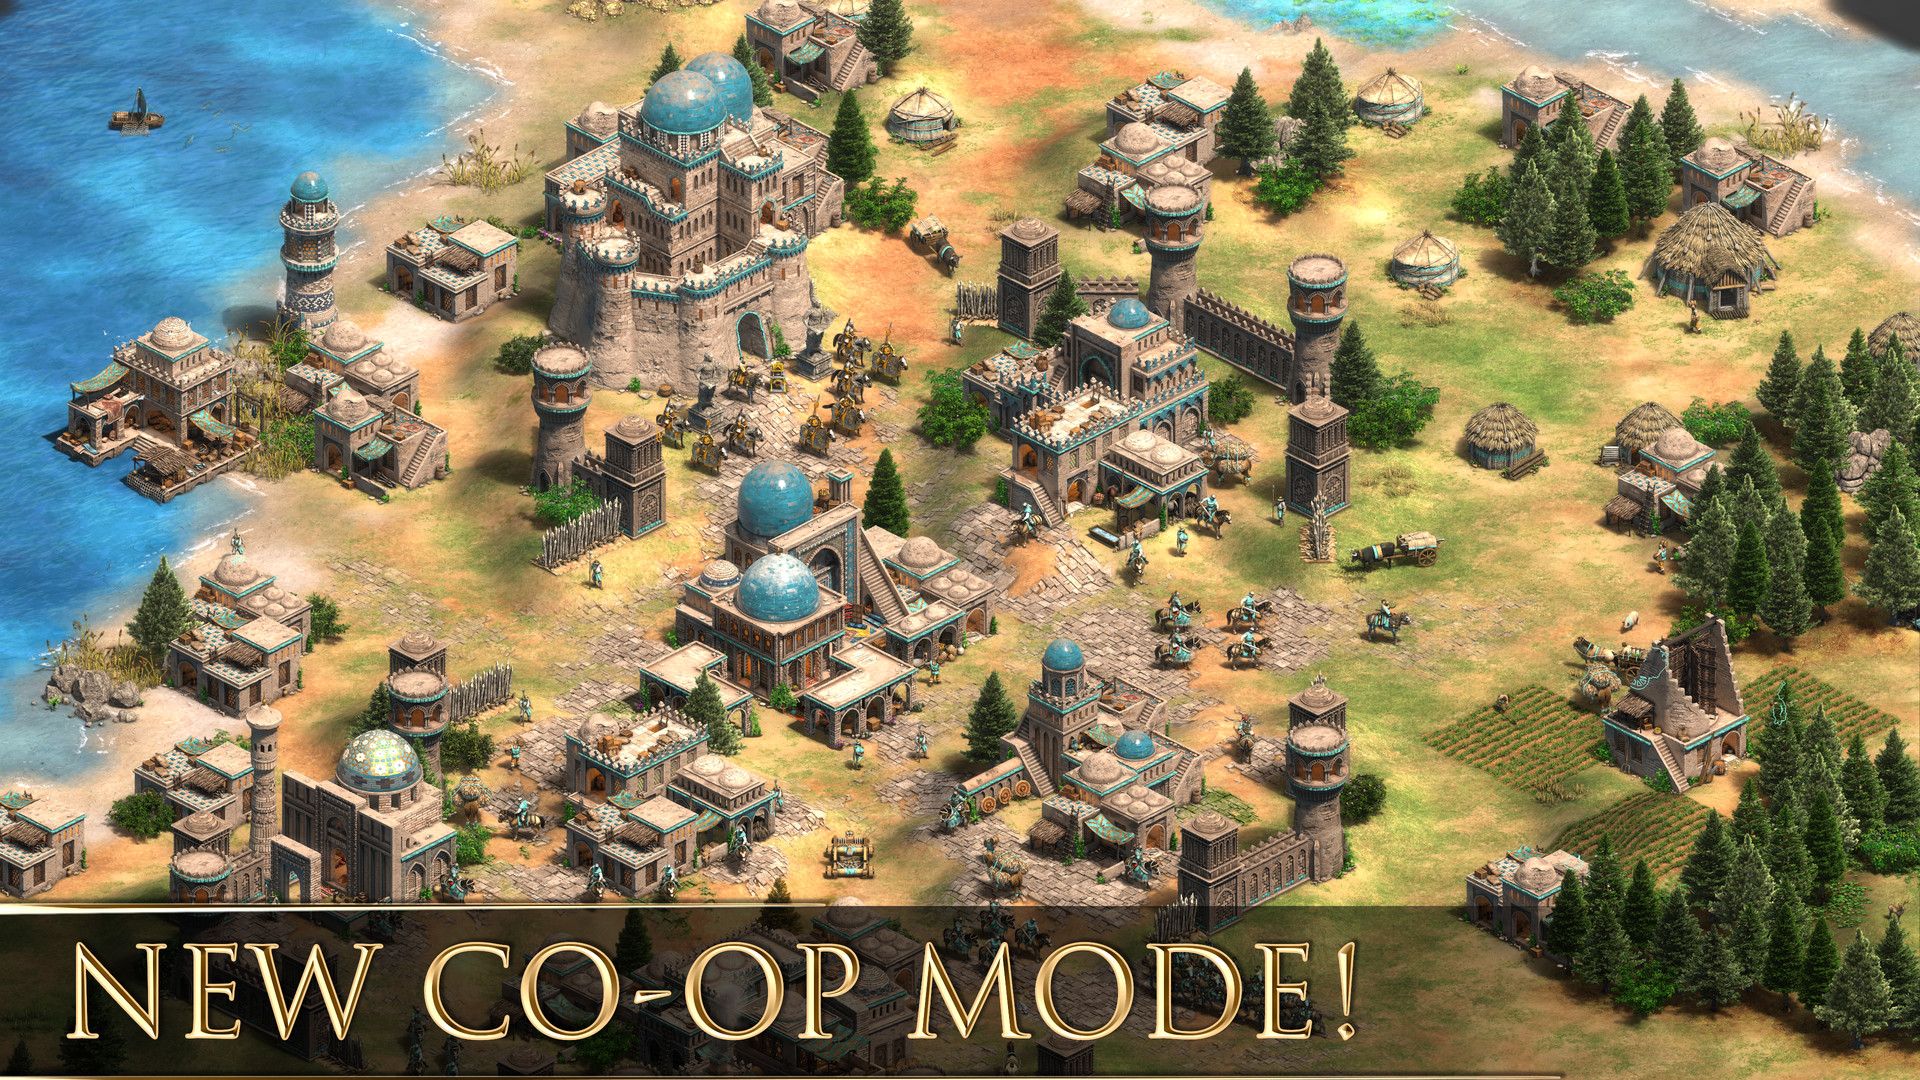 age of empires ii pc download